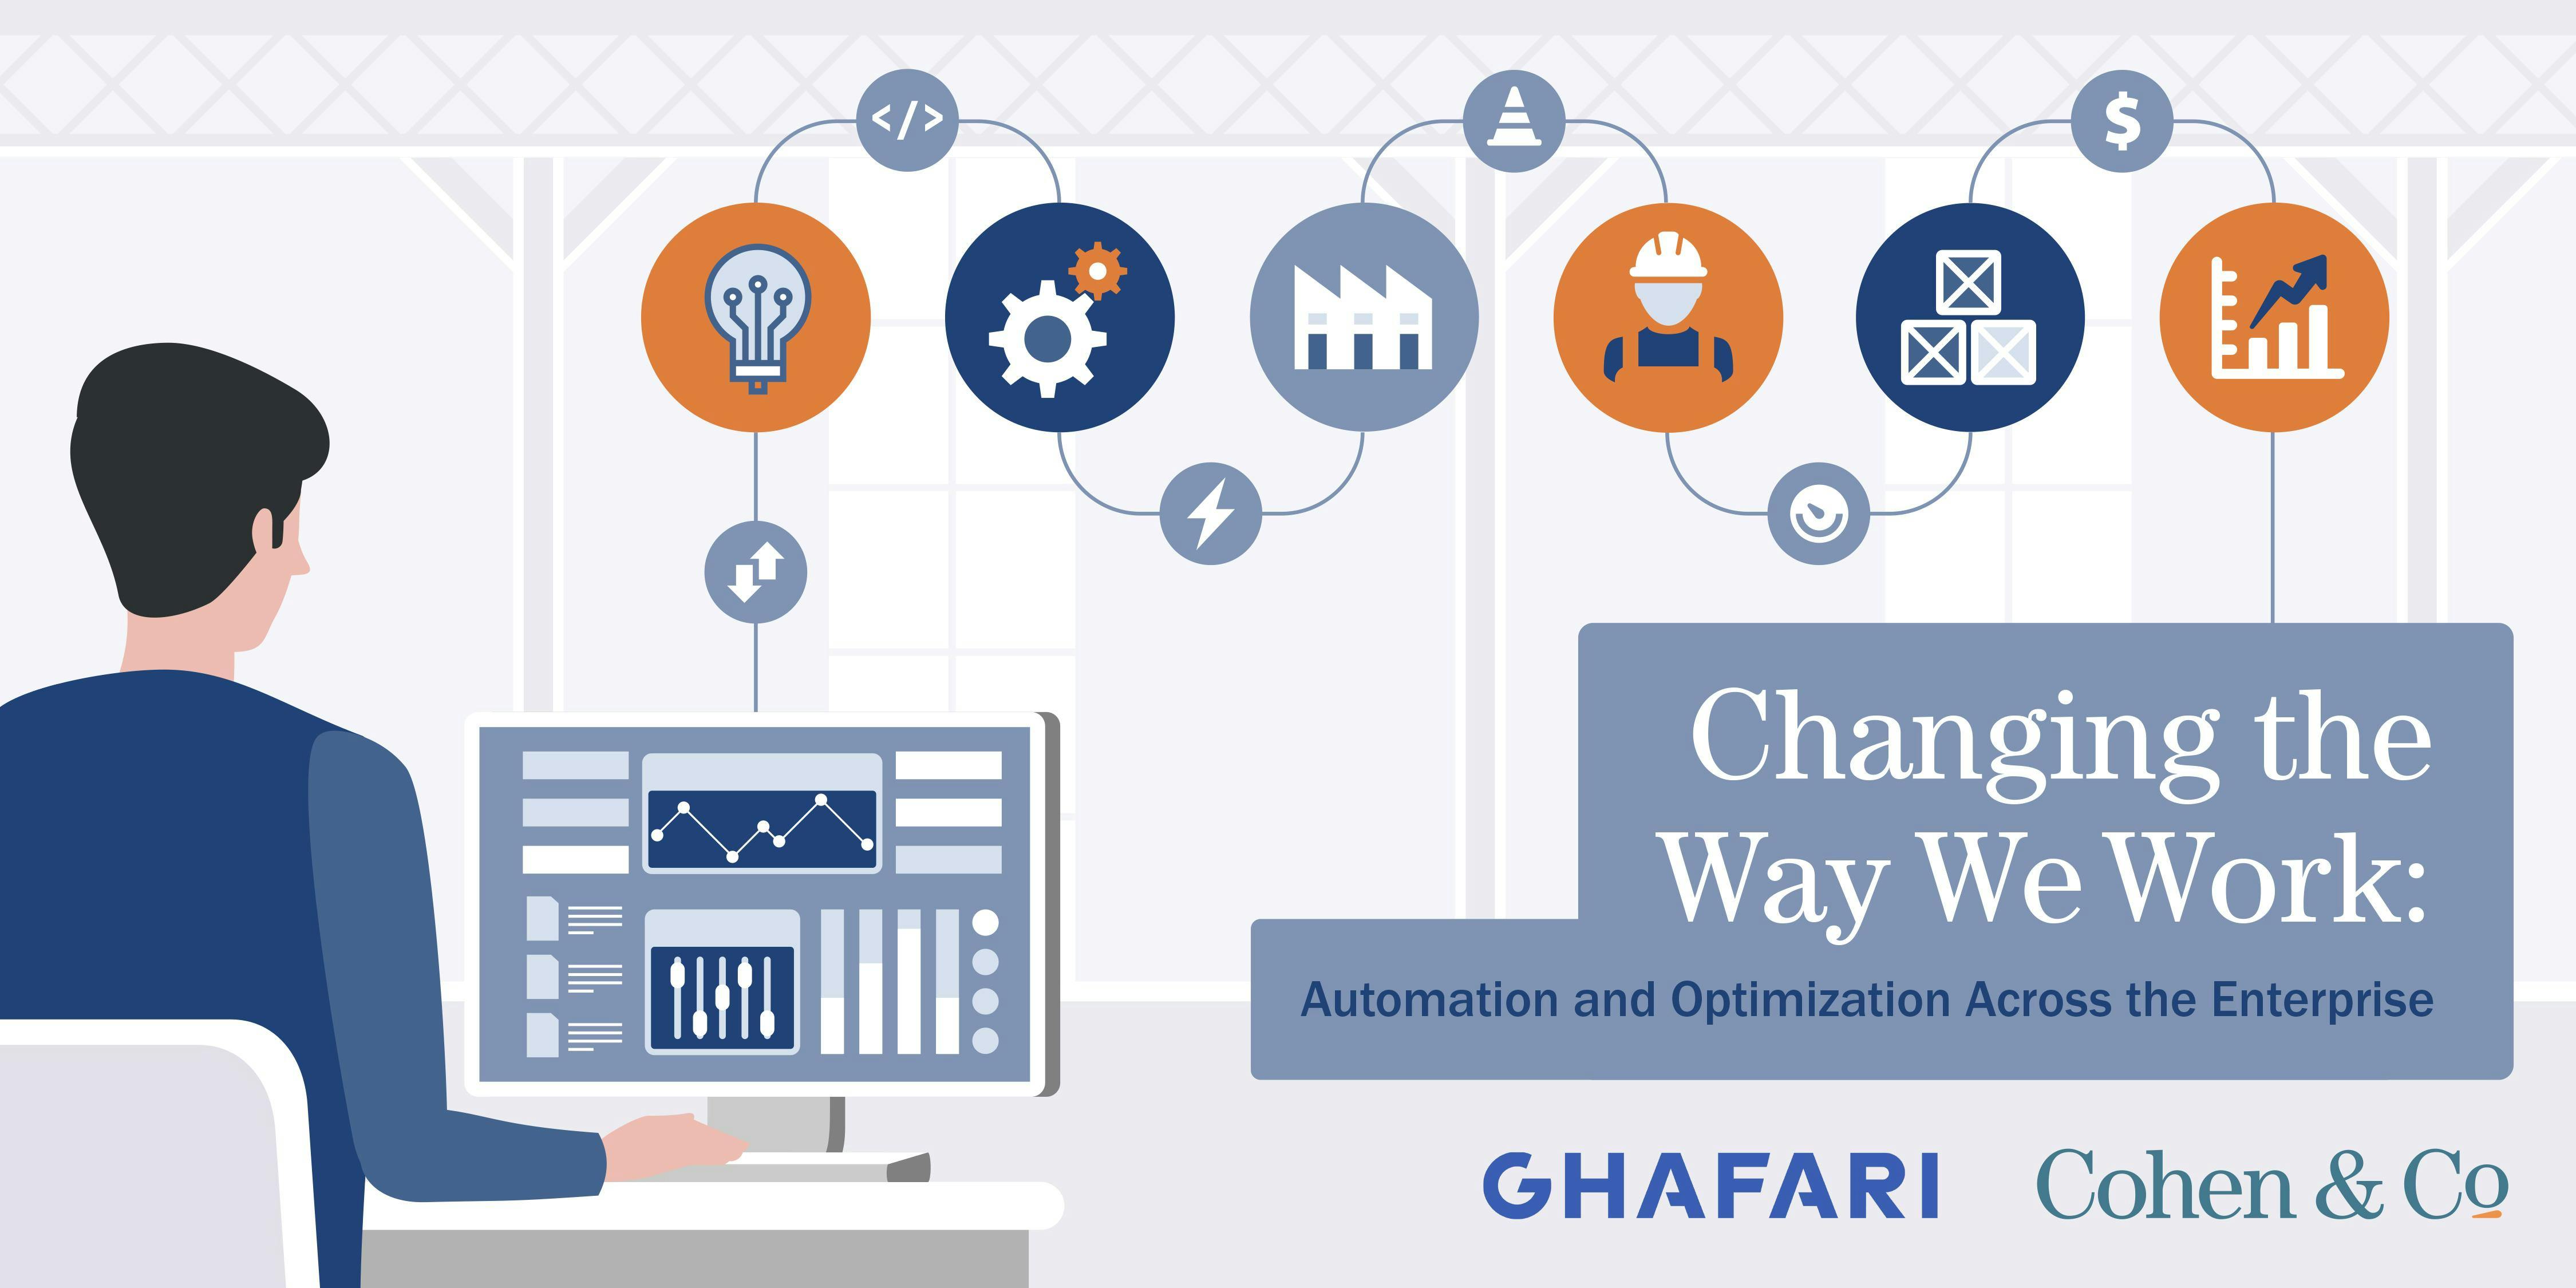 Changing the Way We Work: Automation and Optimization Across the Enterprise